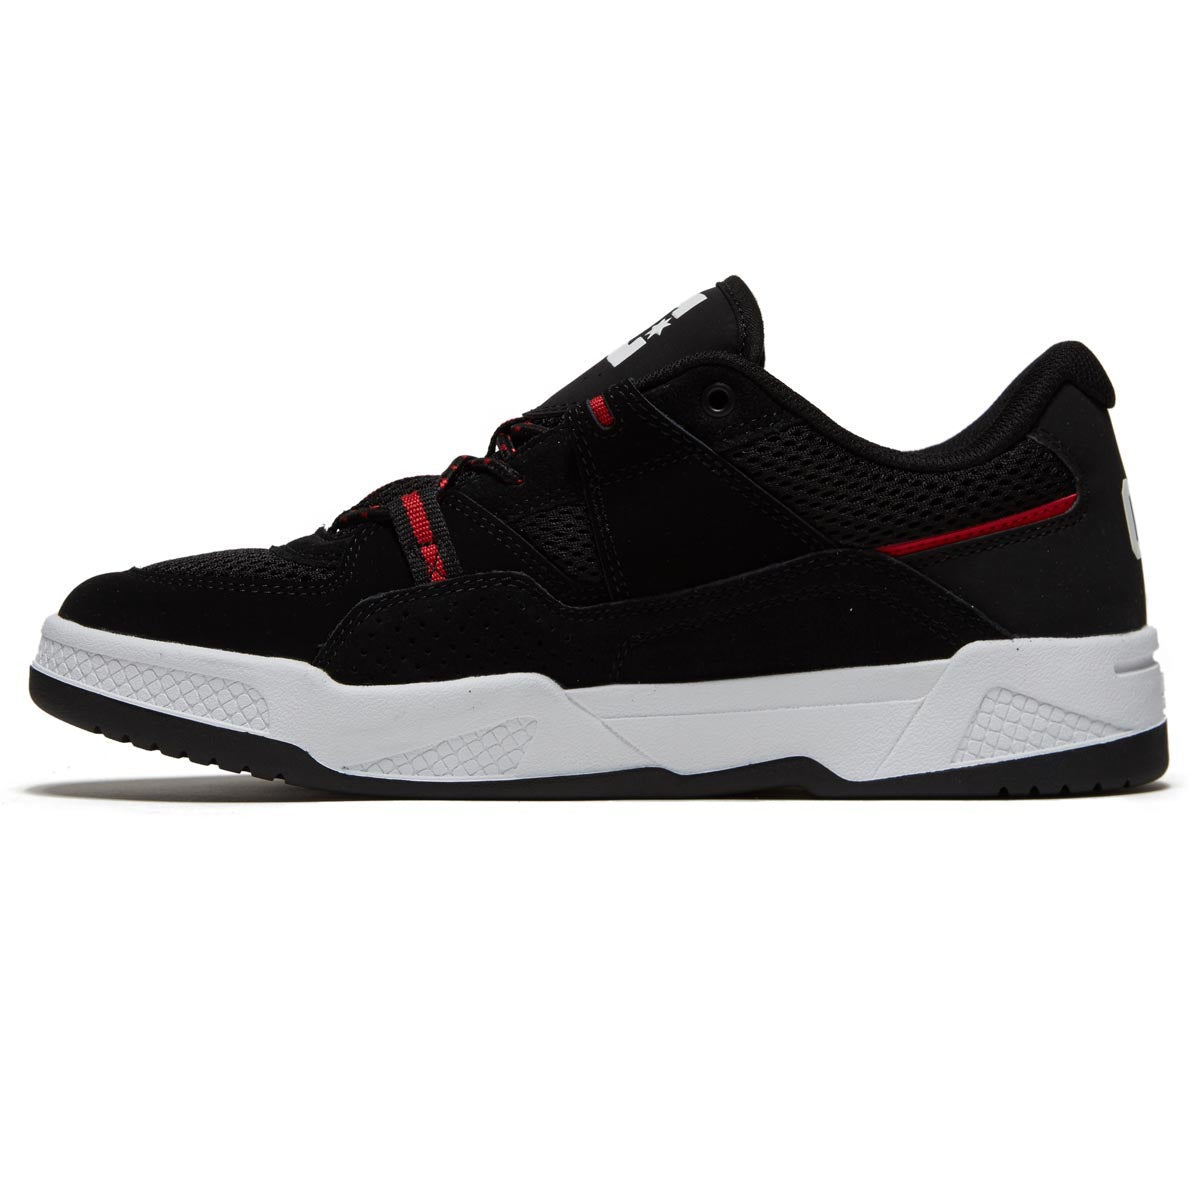 DC Construct Shoes - Black/Hot Coral image 2